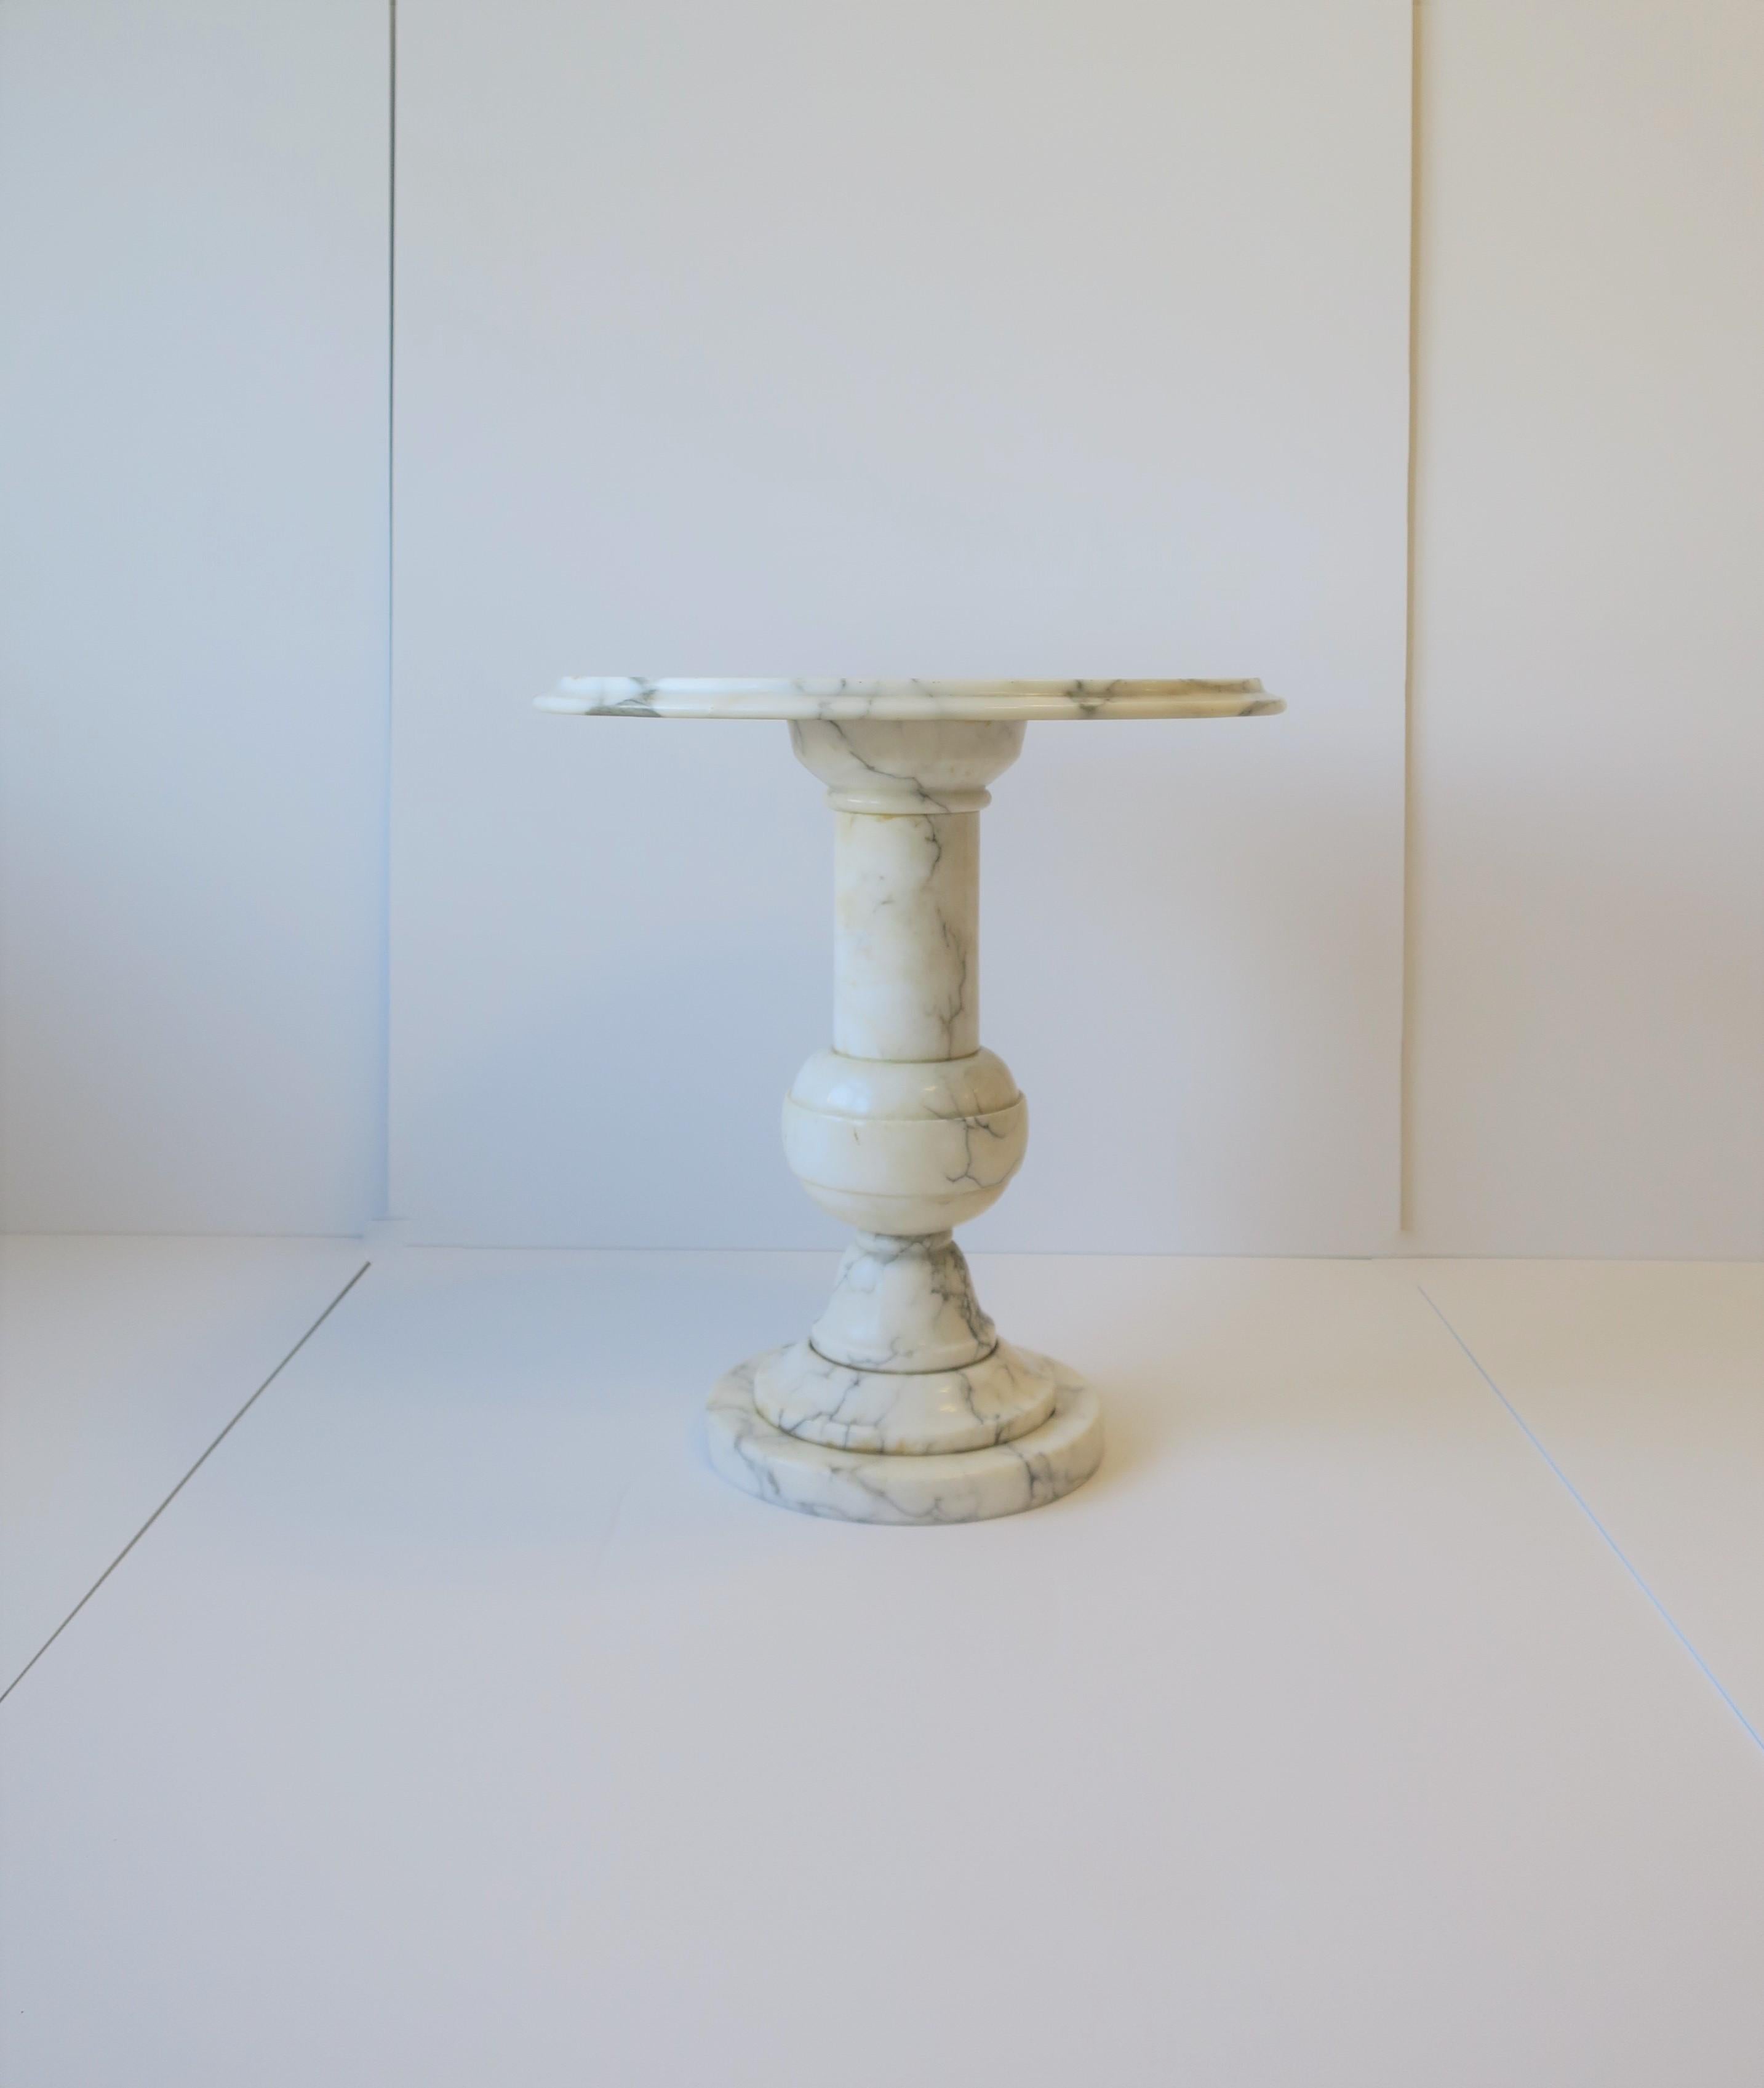 A beautiful and substantial Italian marble round side or drinks table, circa mid-20th century, Italy. Marble is predominantly white with black and grey veining. Dimensions: 18